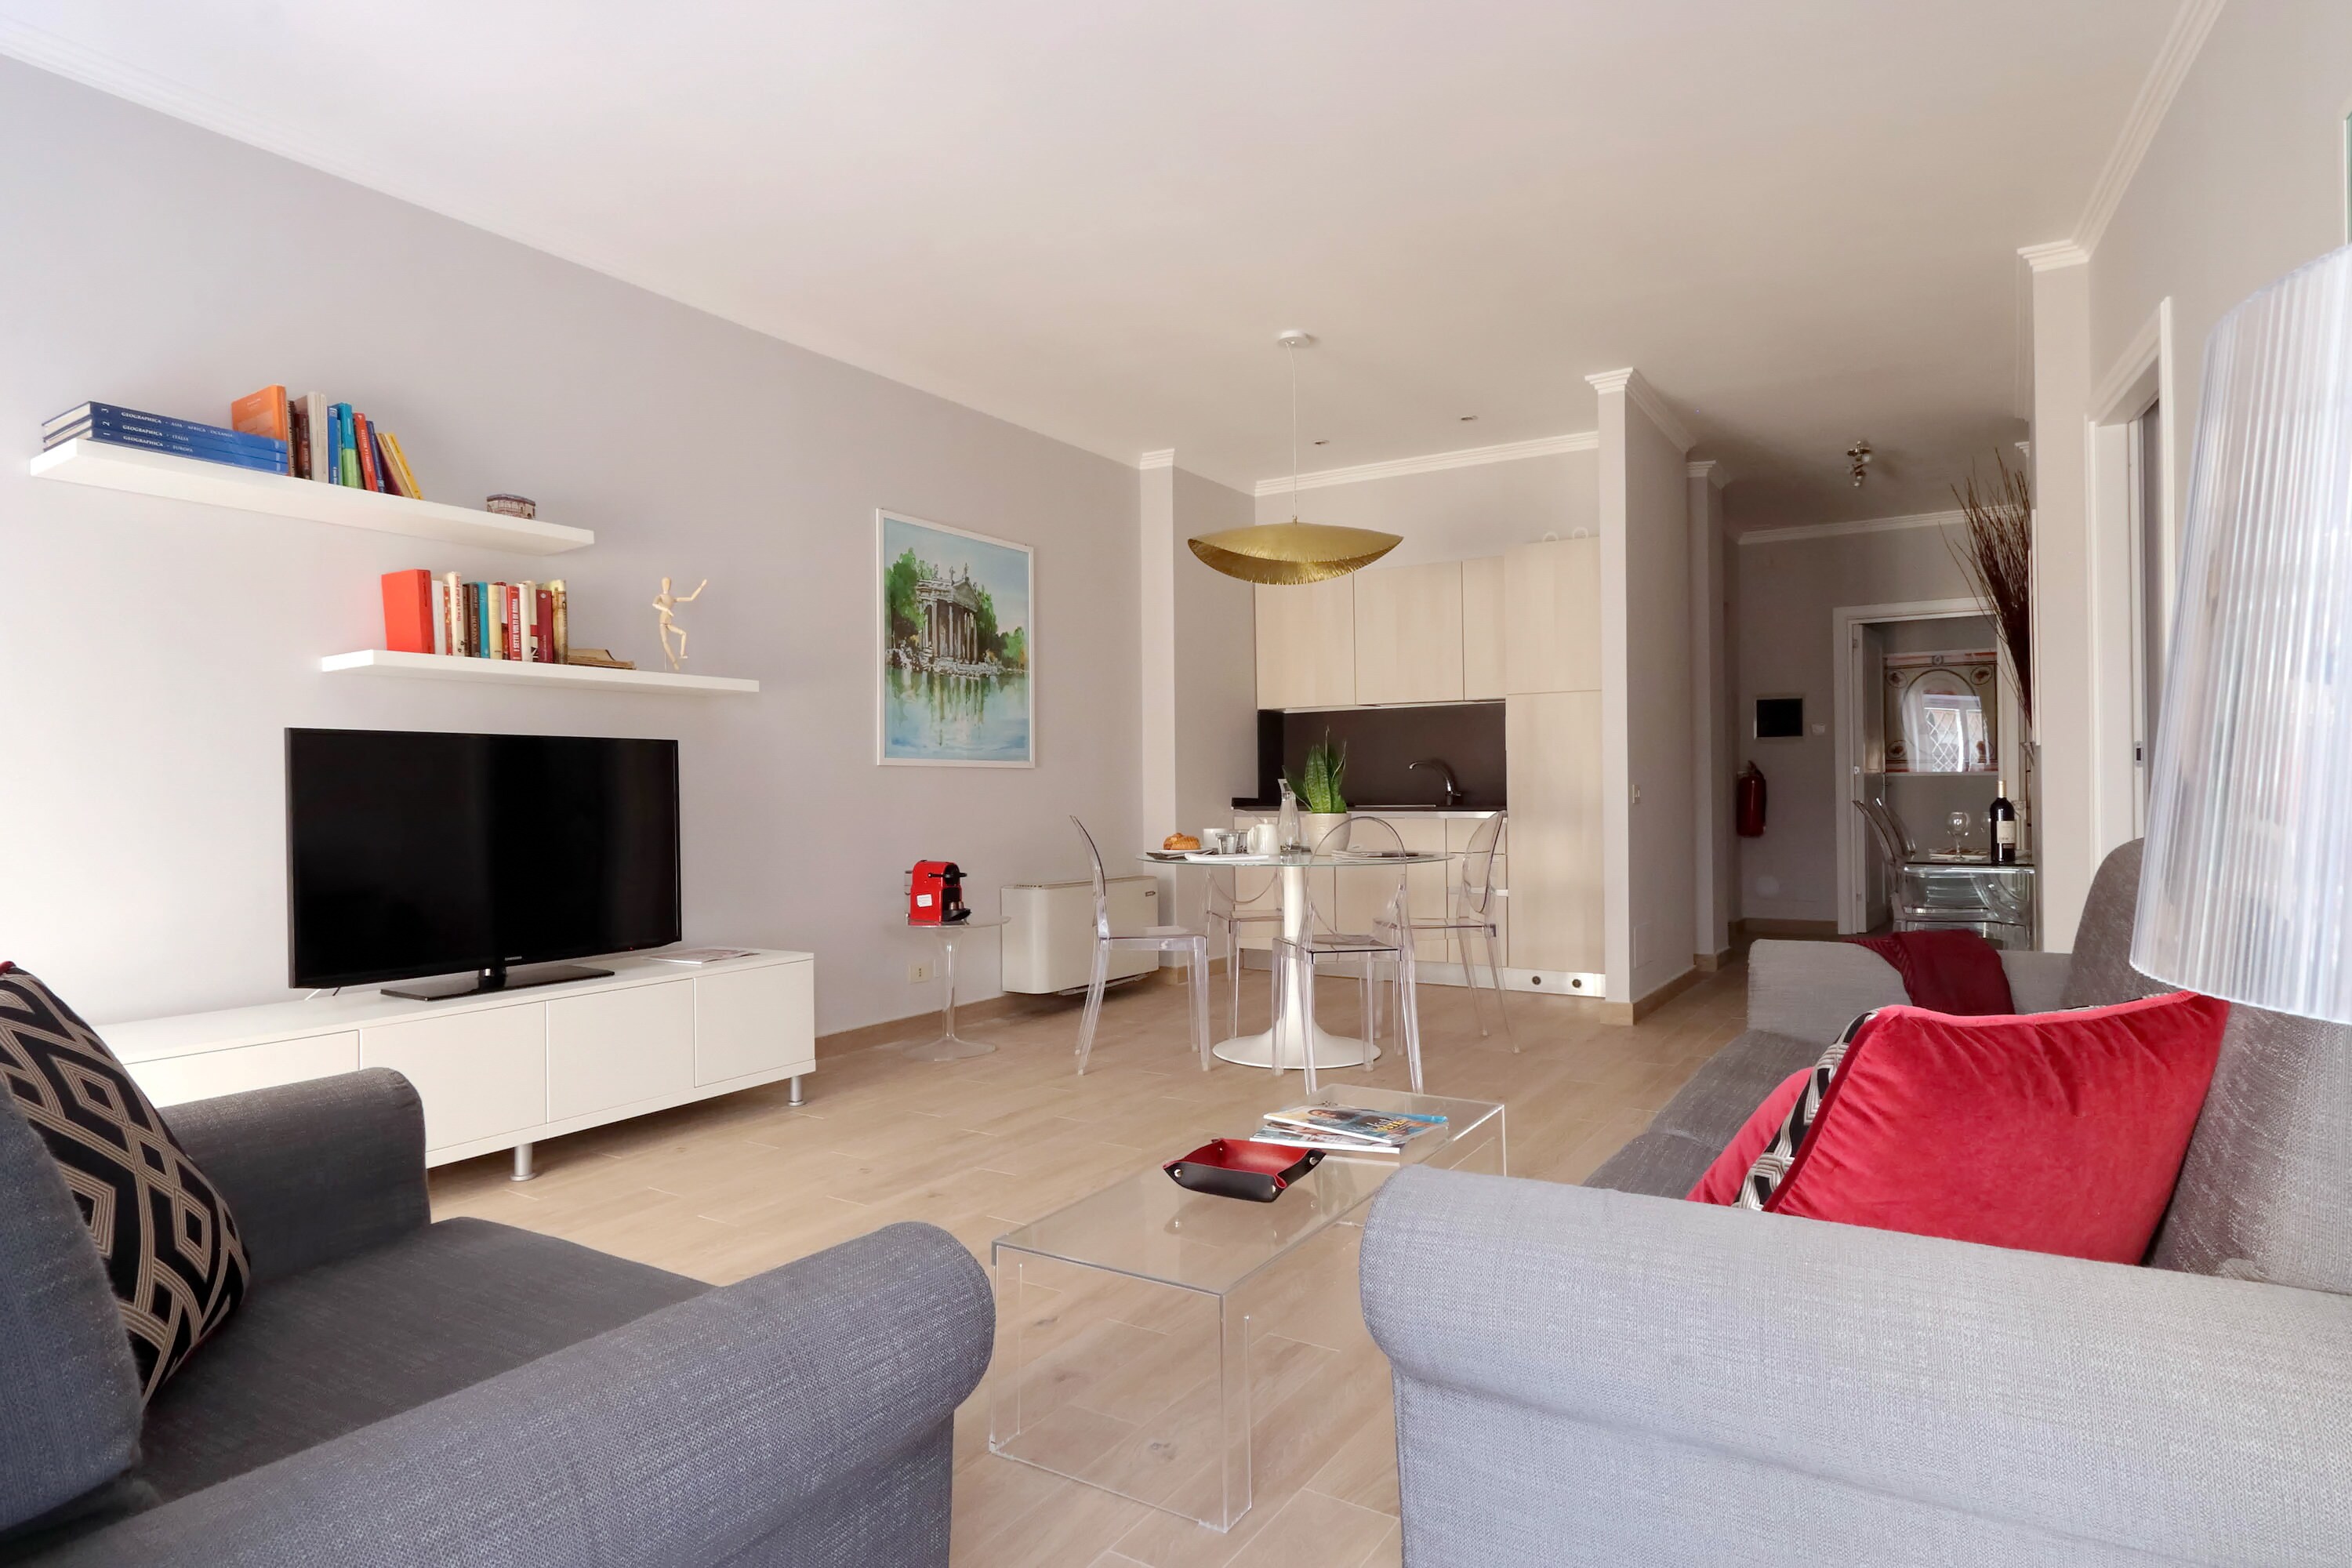 Property Image 1 - Cheerful Light Apartment with Airy Interior